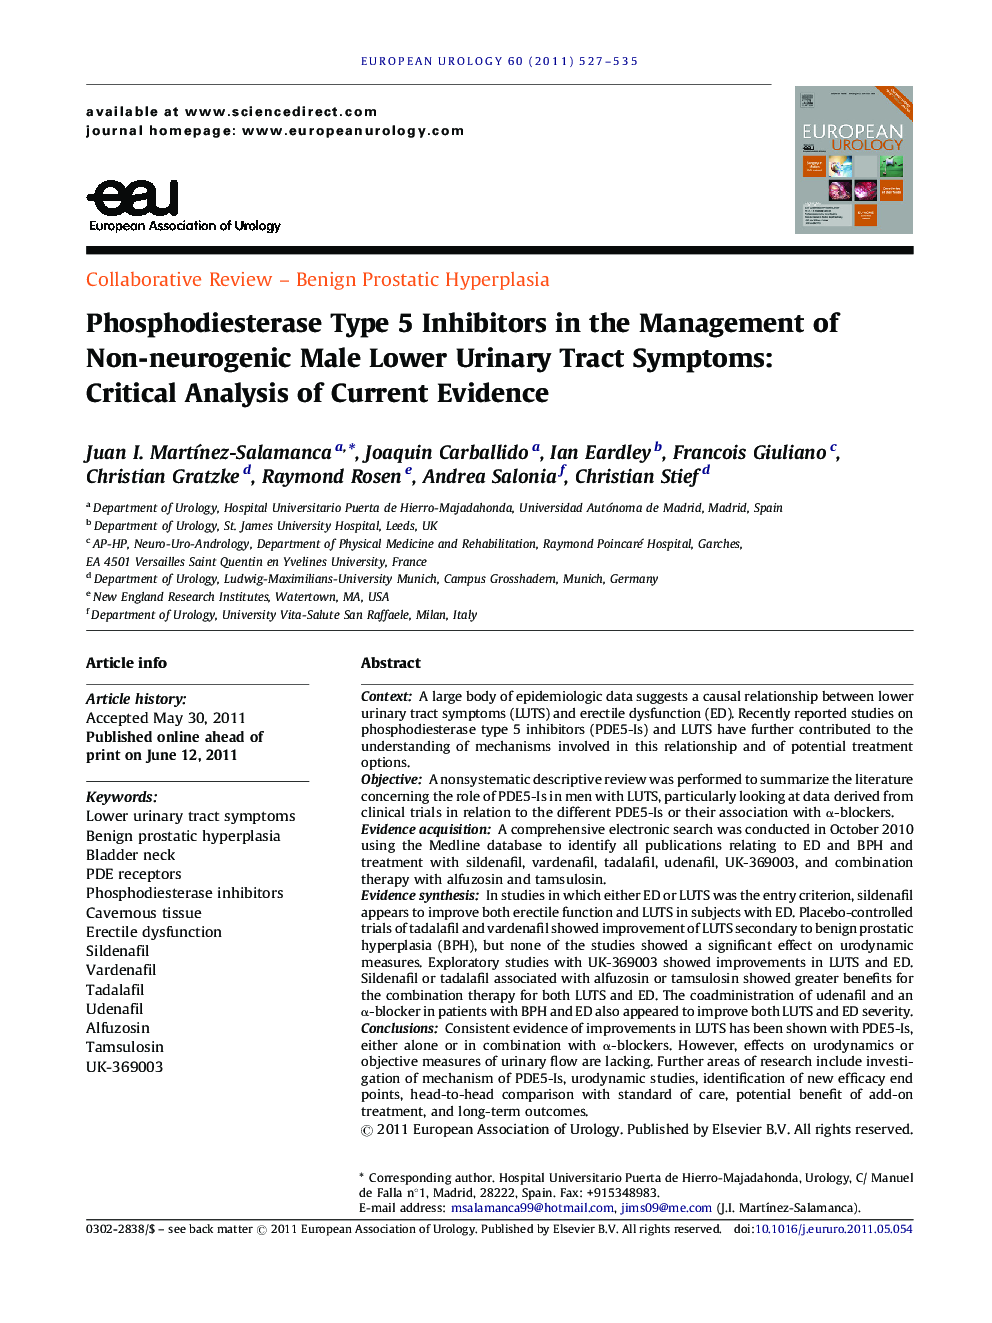 Phosphodiesterase Type 5 Inhibitors in the Management of Non-neurogenic Male Lower Urinary Tract Symptoms: Critical Analysis of Current Evidence